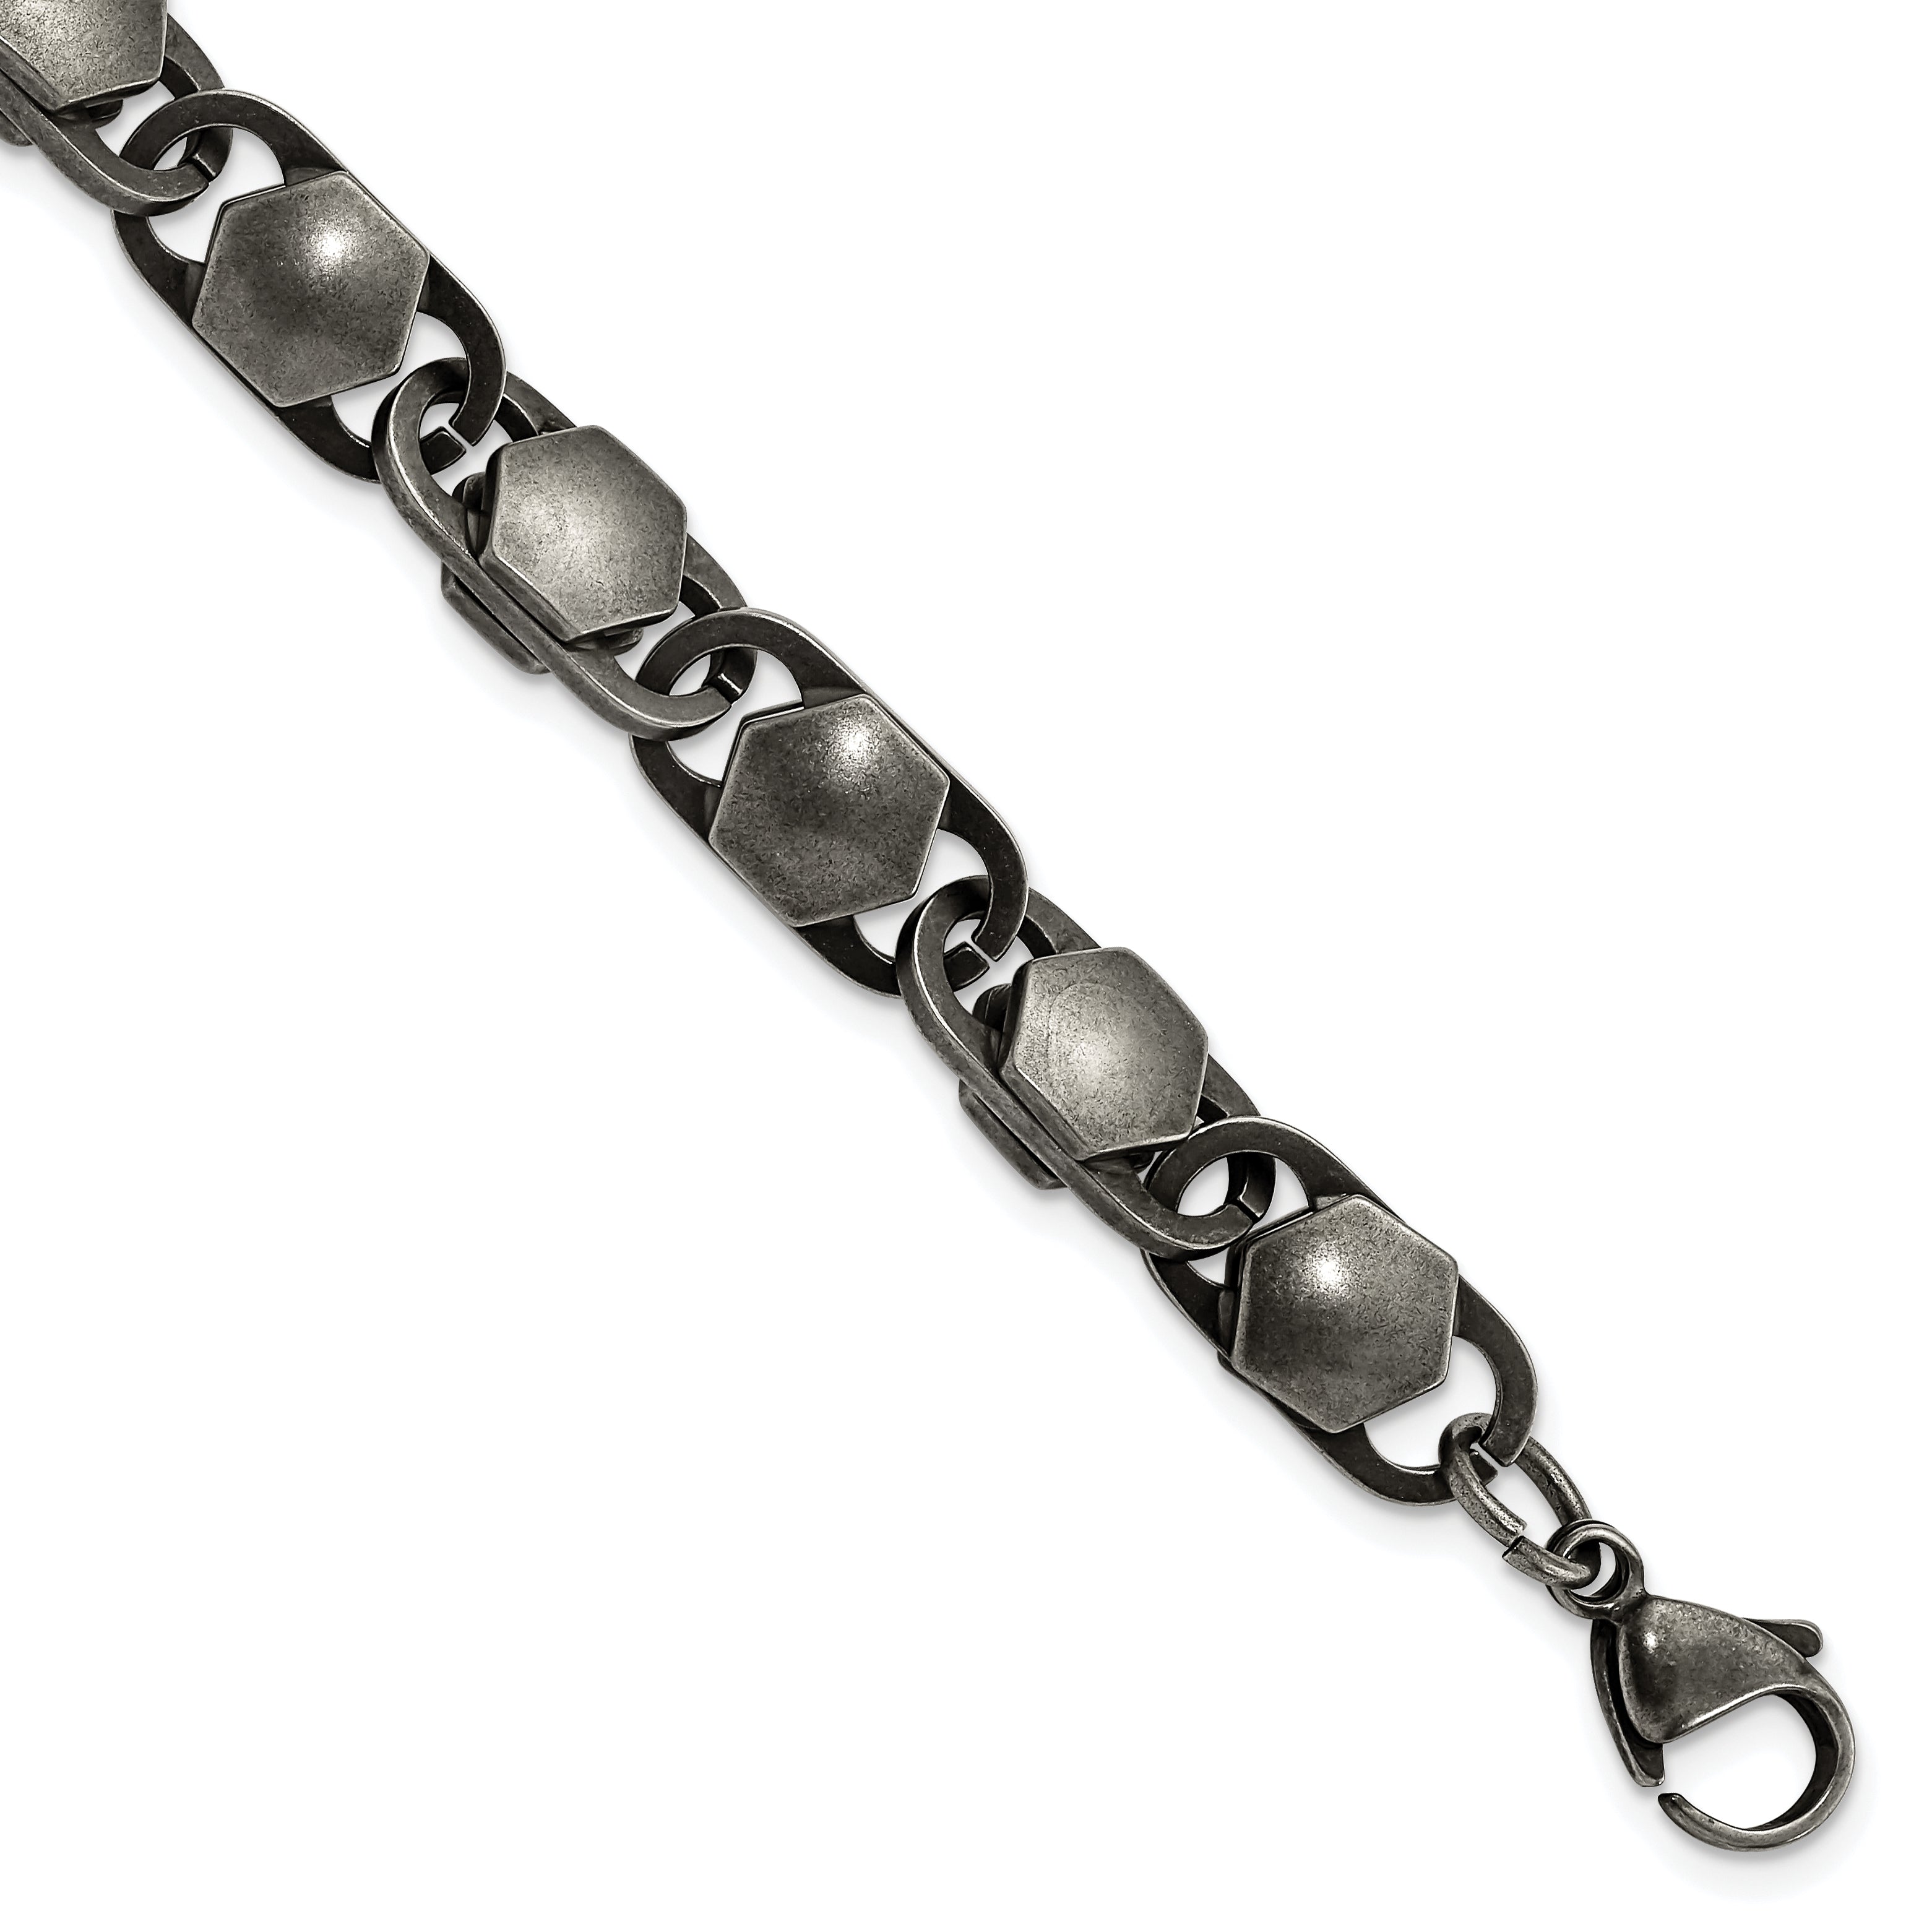 Chisel Stainless Steel Antiqued and Brushed 8.50mm 8.25 inch Bracelet